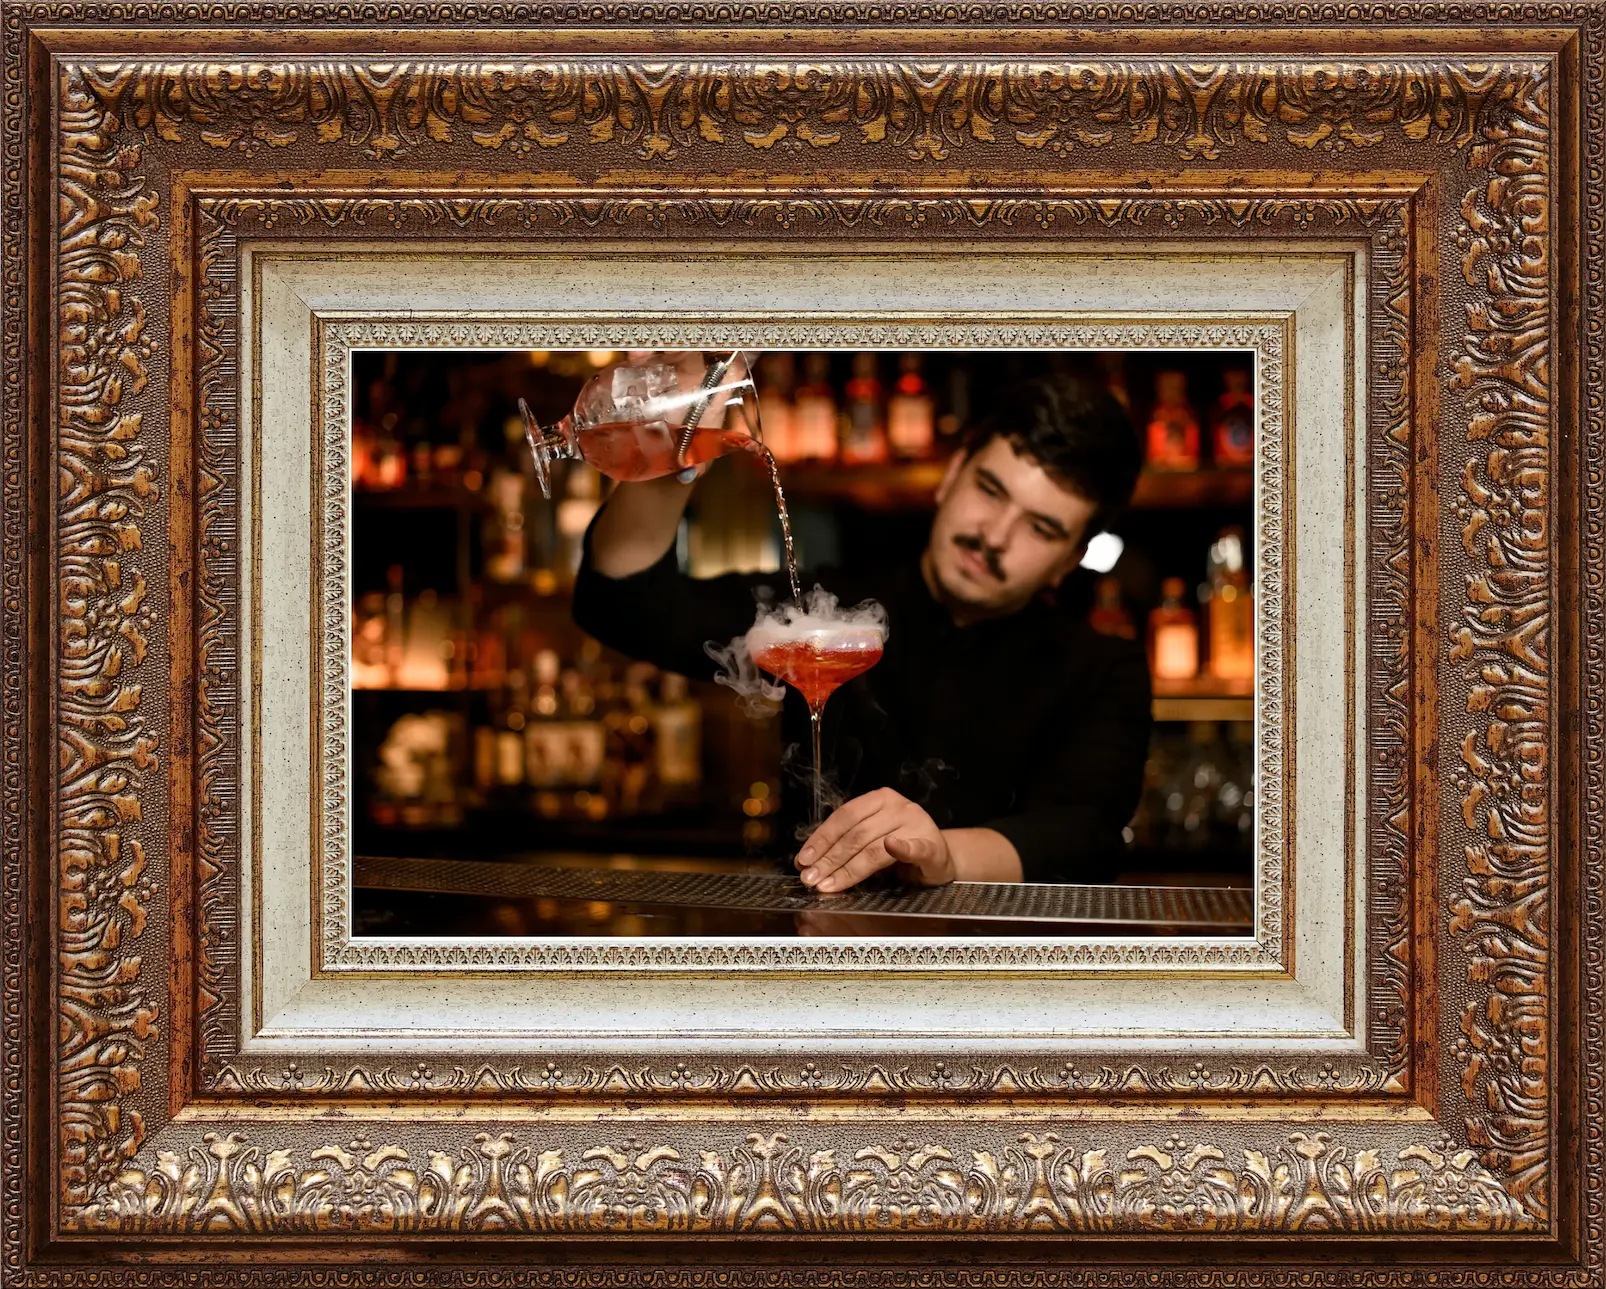 Image of bartender pouring cocktail from a cocktail shaker